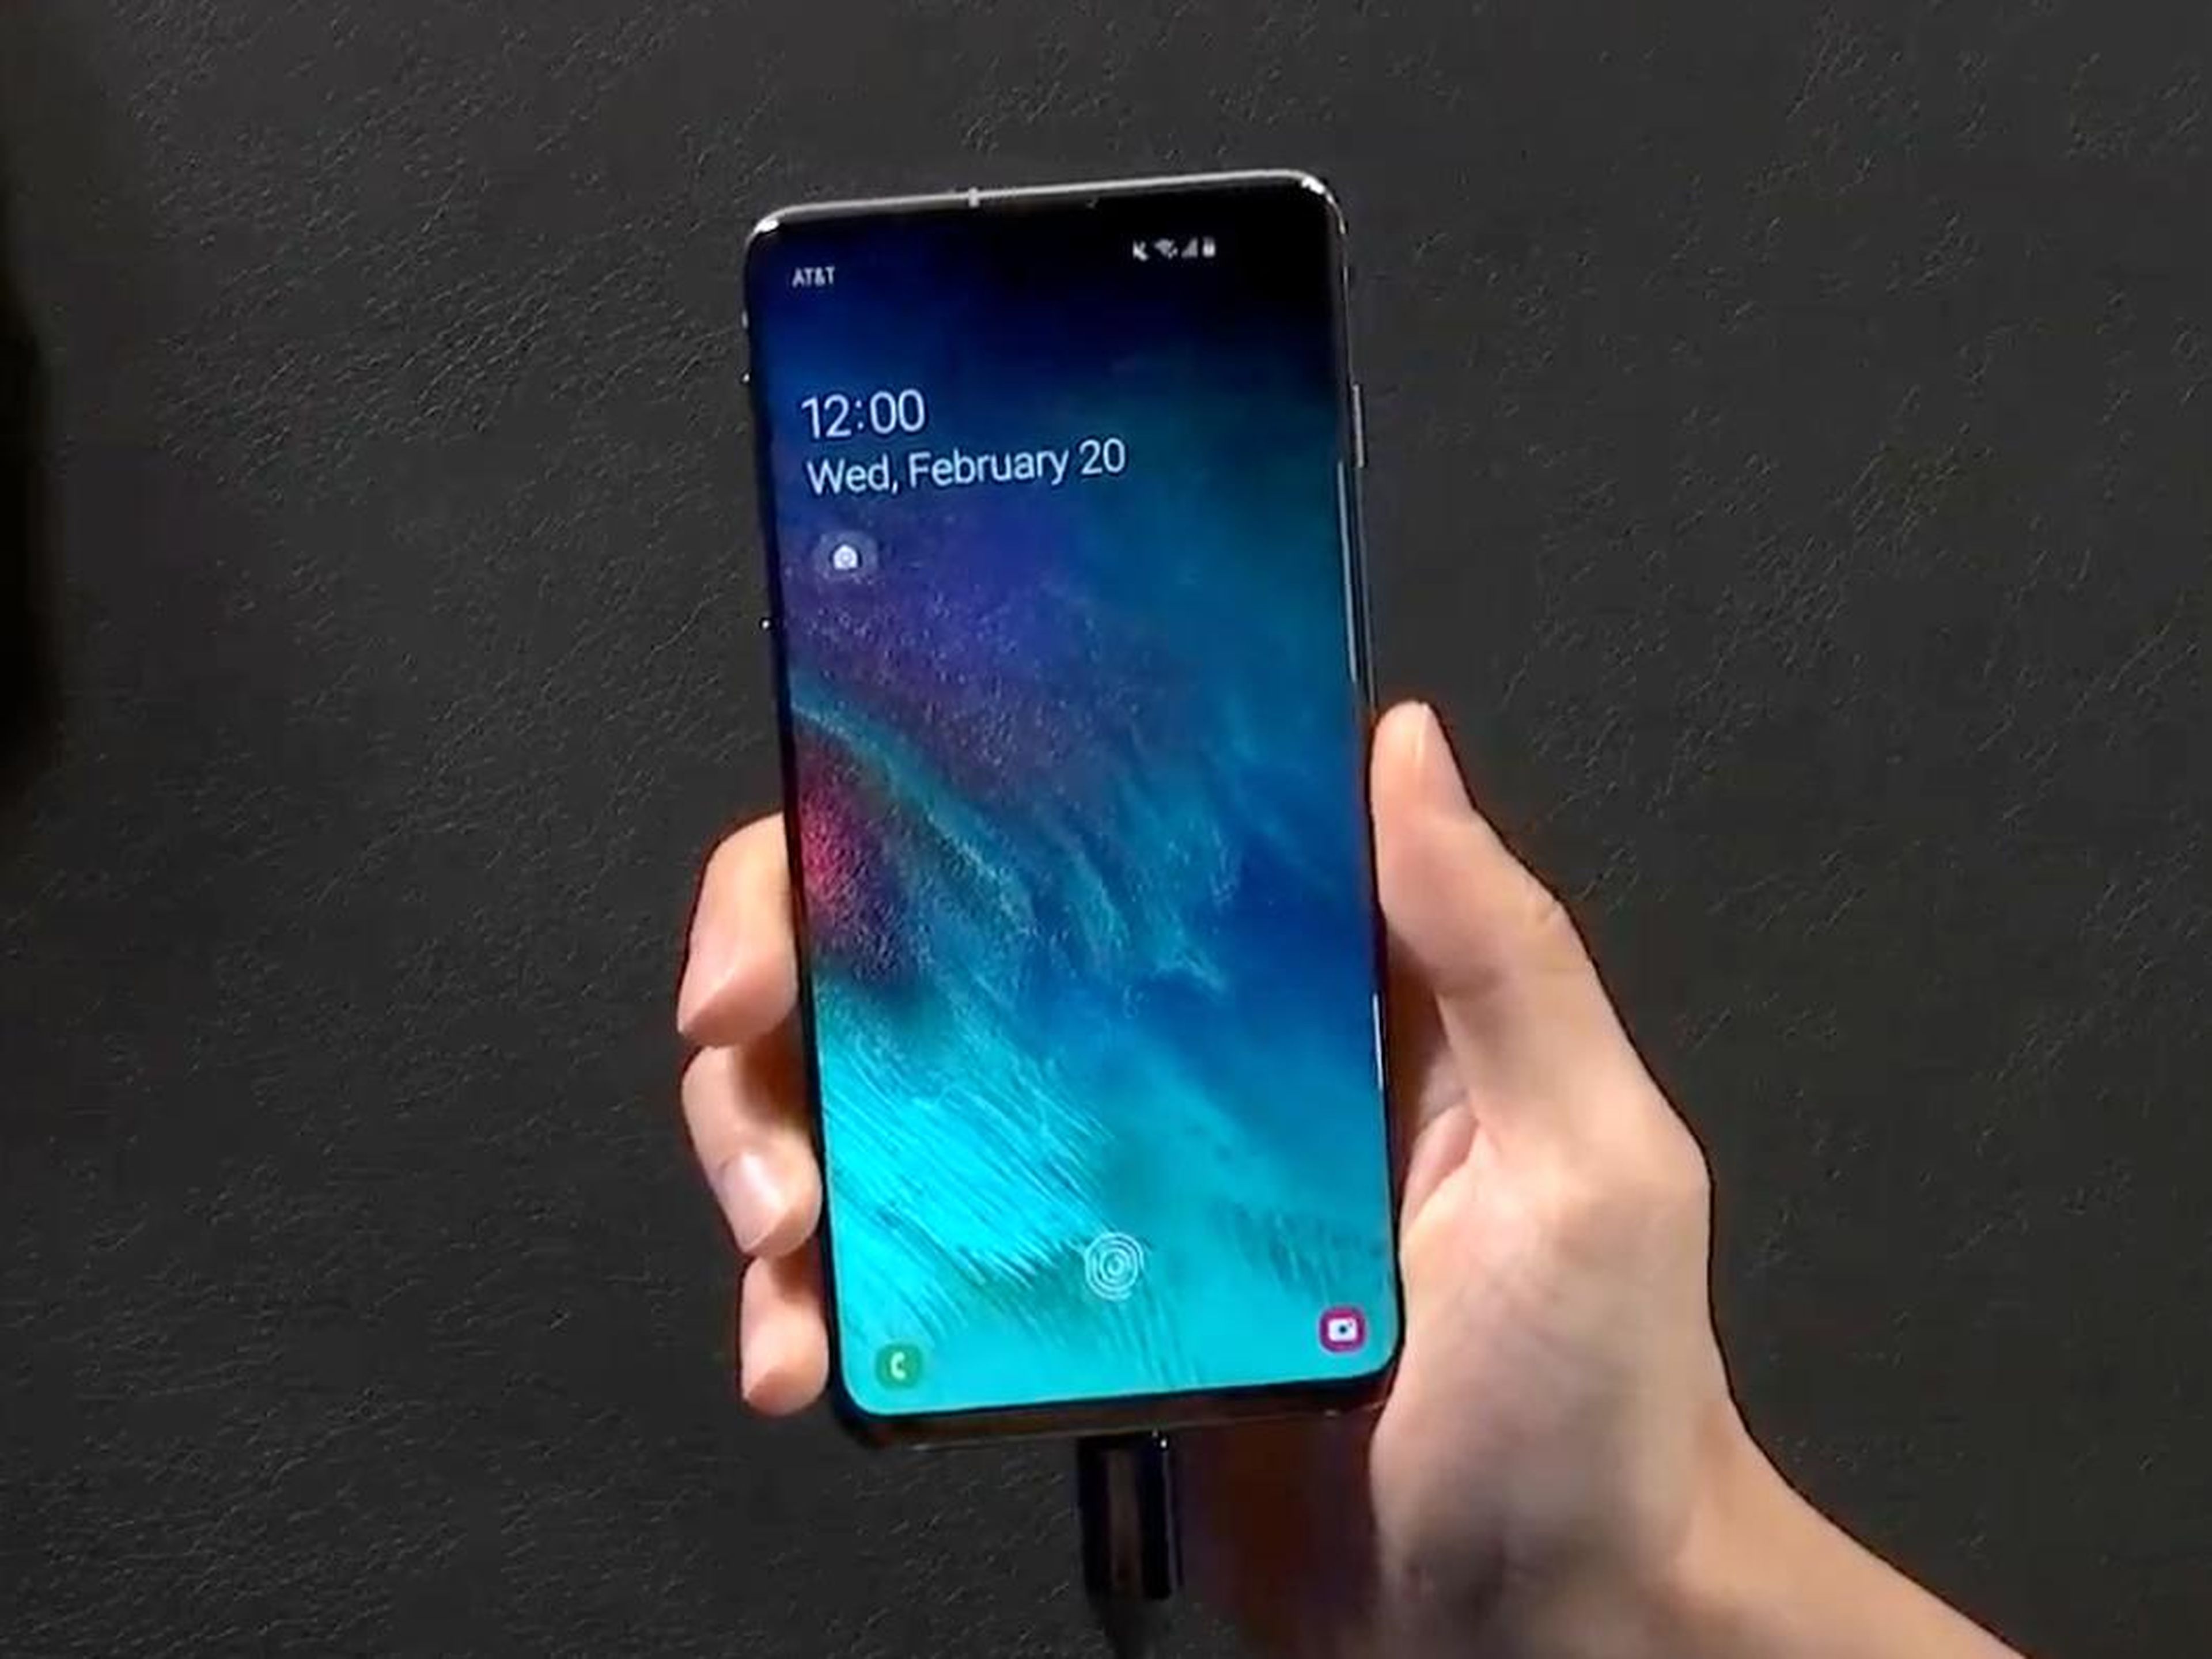 2. The Galaxy Note 10 has a slightly larger display, but the Galaxy S10 is extremely similar, and probably more comfortable for most people.